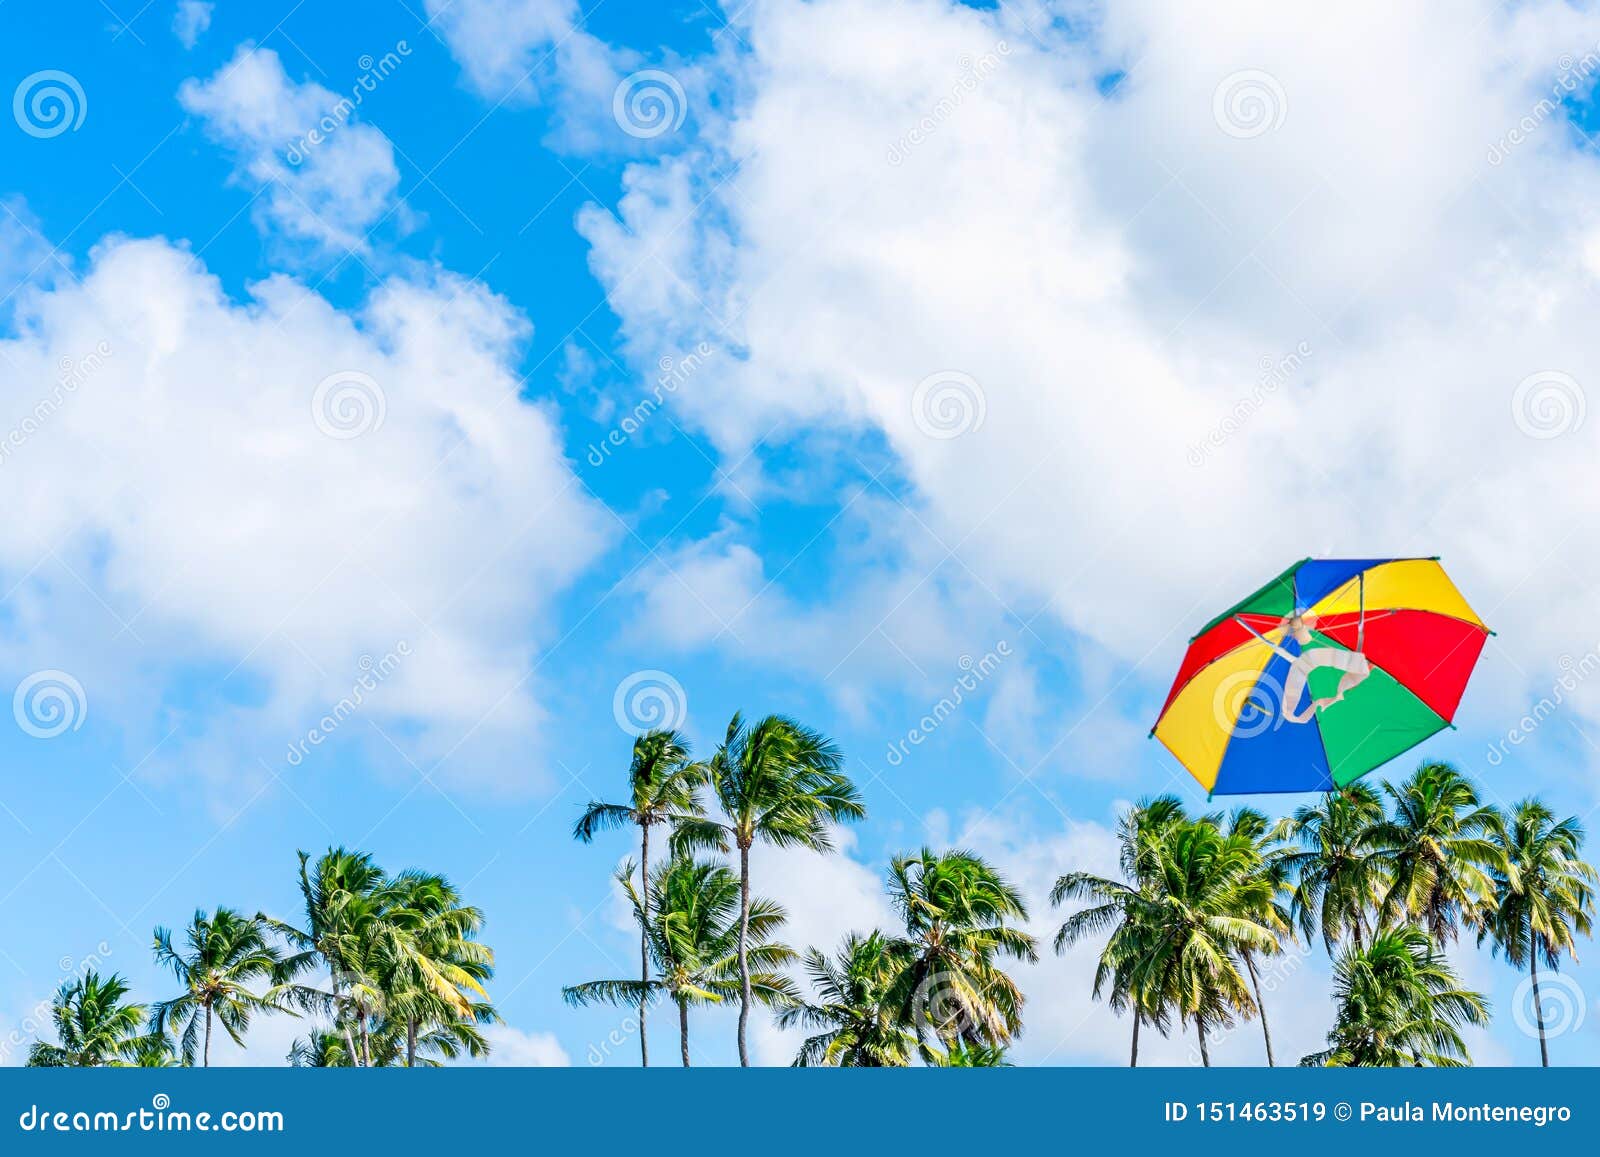 beautiful and colorful frevo umbrella kite flying in a blue sky day. it is a  of brazilian carnival decoration in the city